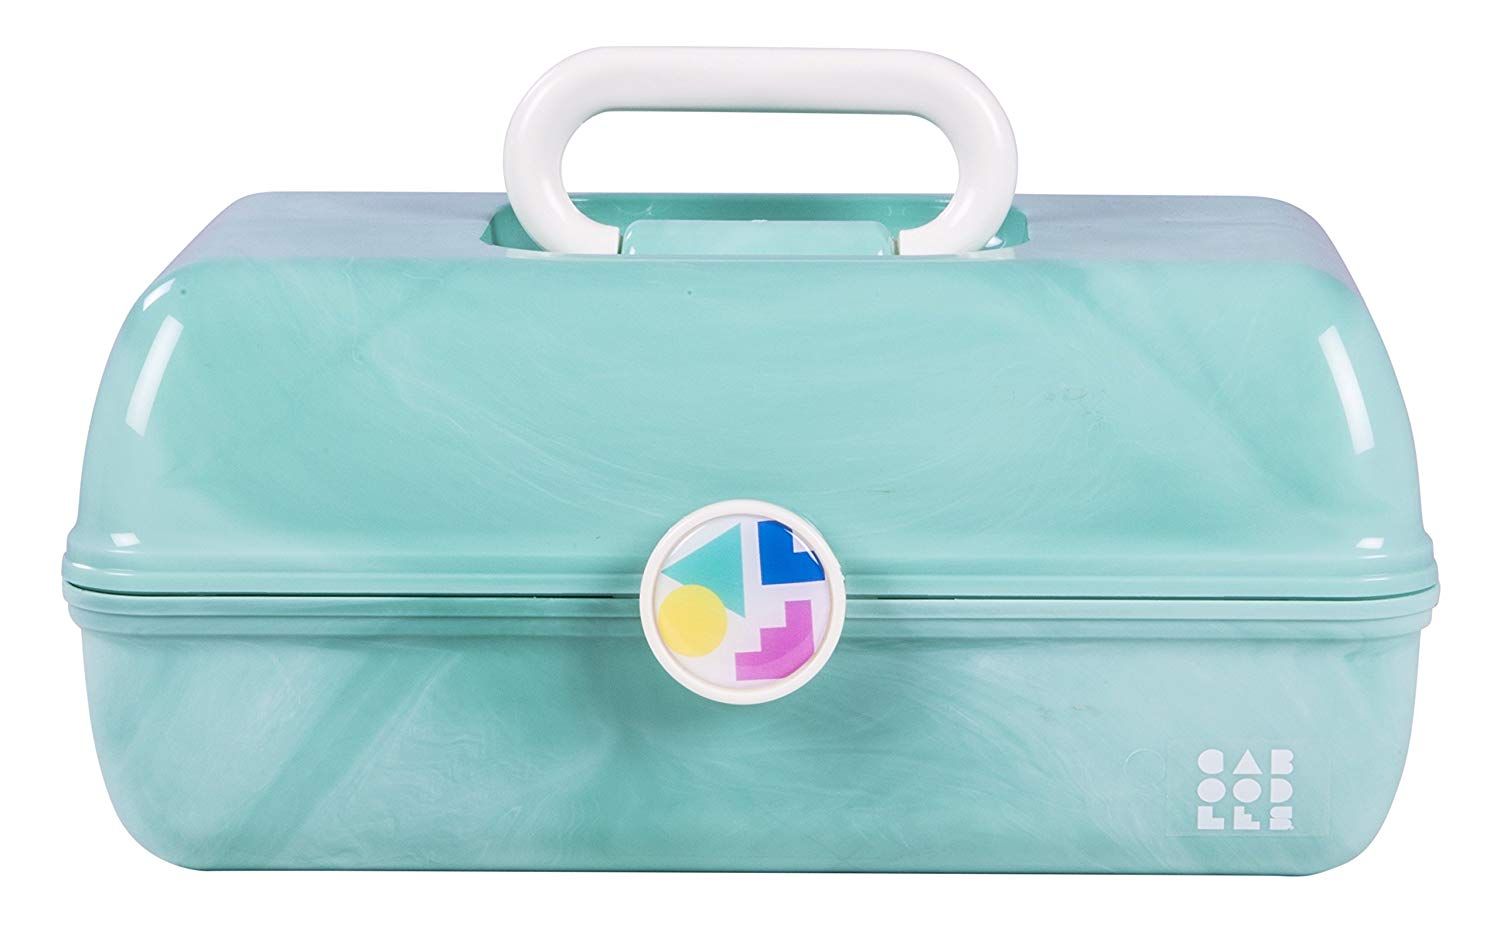 Caboodles Vintage Cases Are Back In Stores And You Can Get One For A Steal